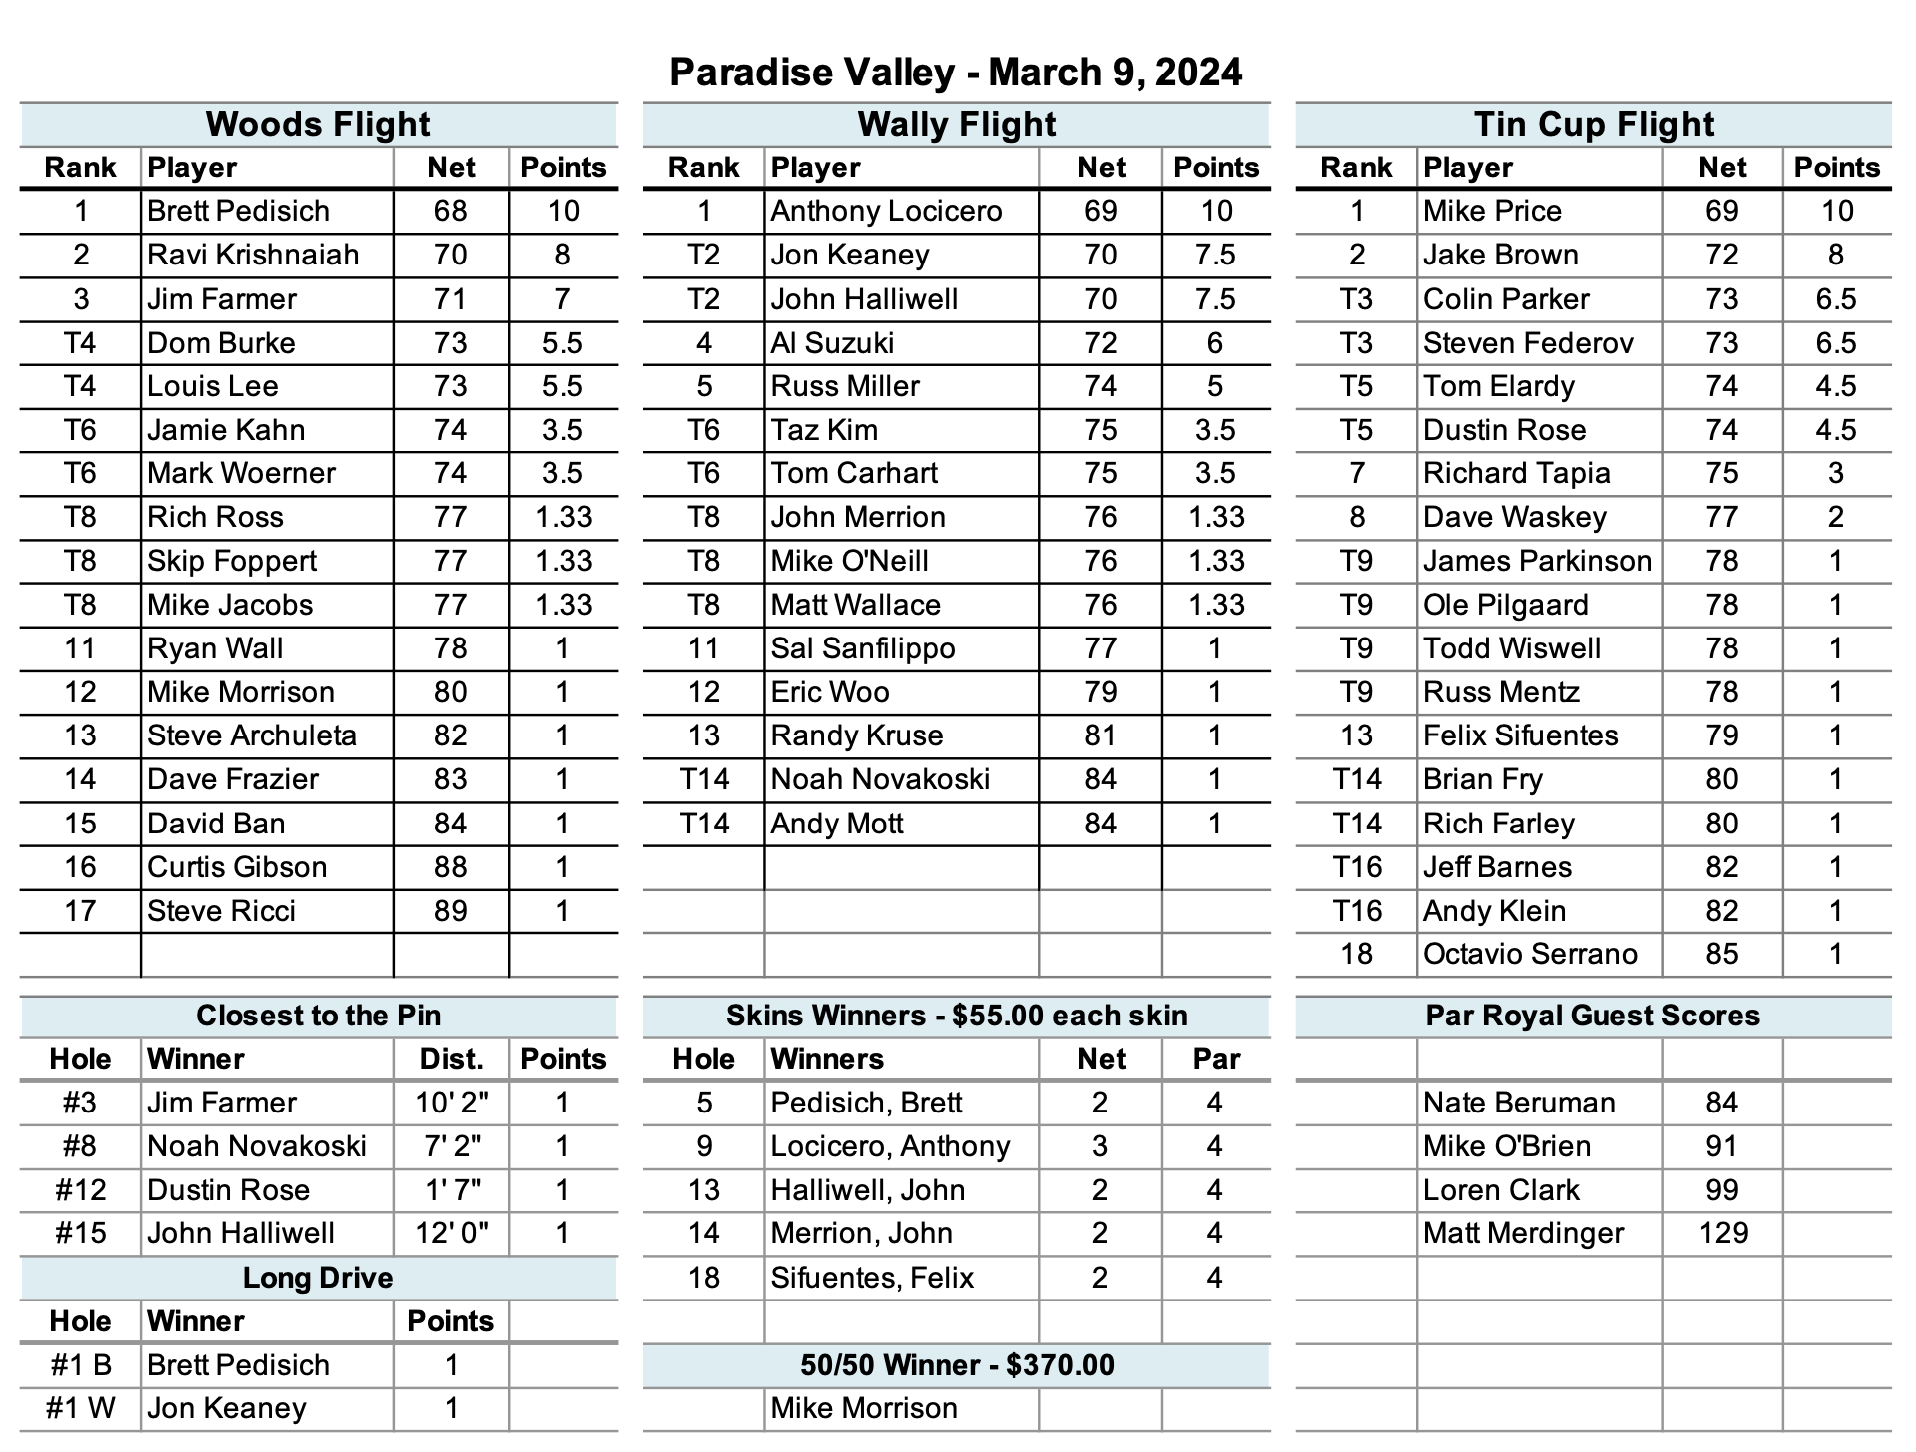 Paradise Valley Results